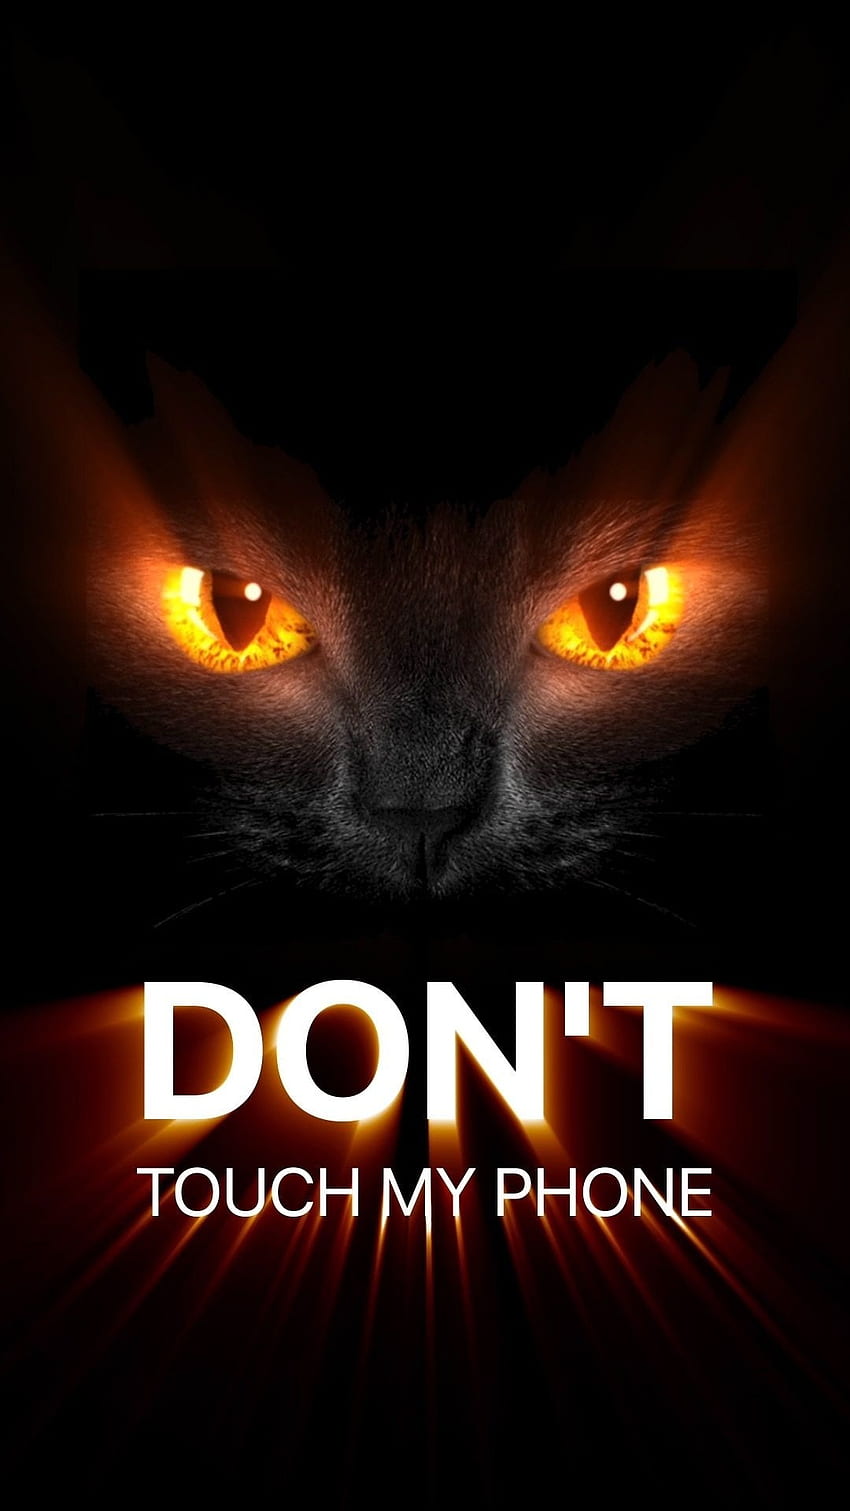 Don't Touch My Phone Wallpapers - Top 25 Best Dont Touch My Phone  Backgrounds Download